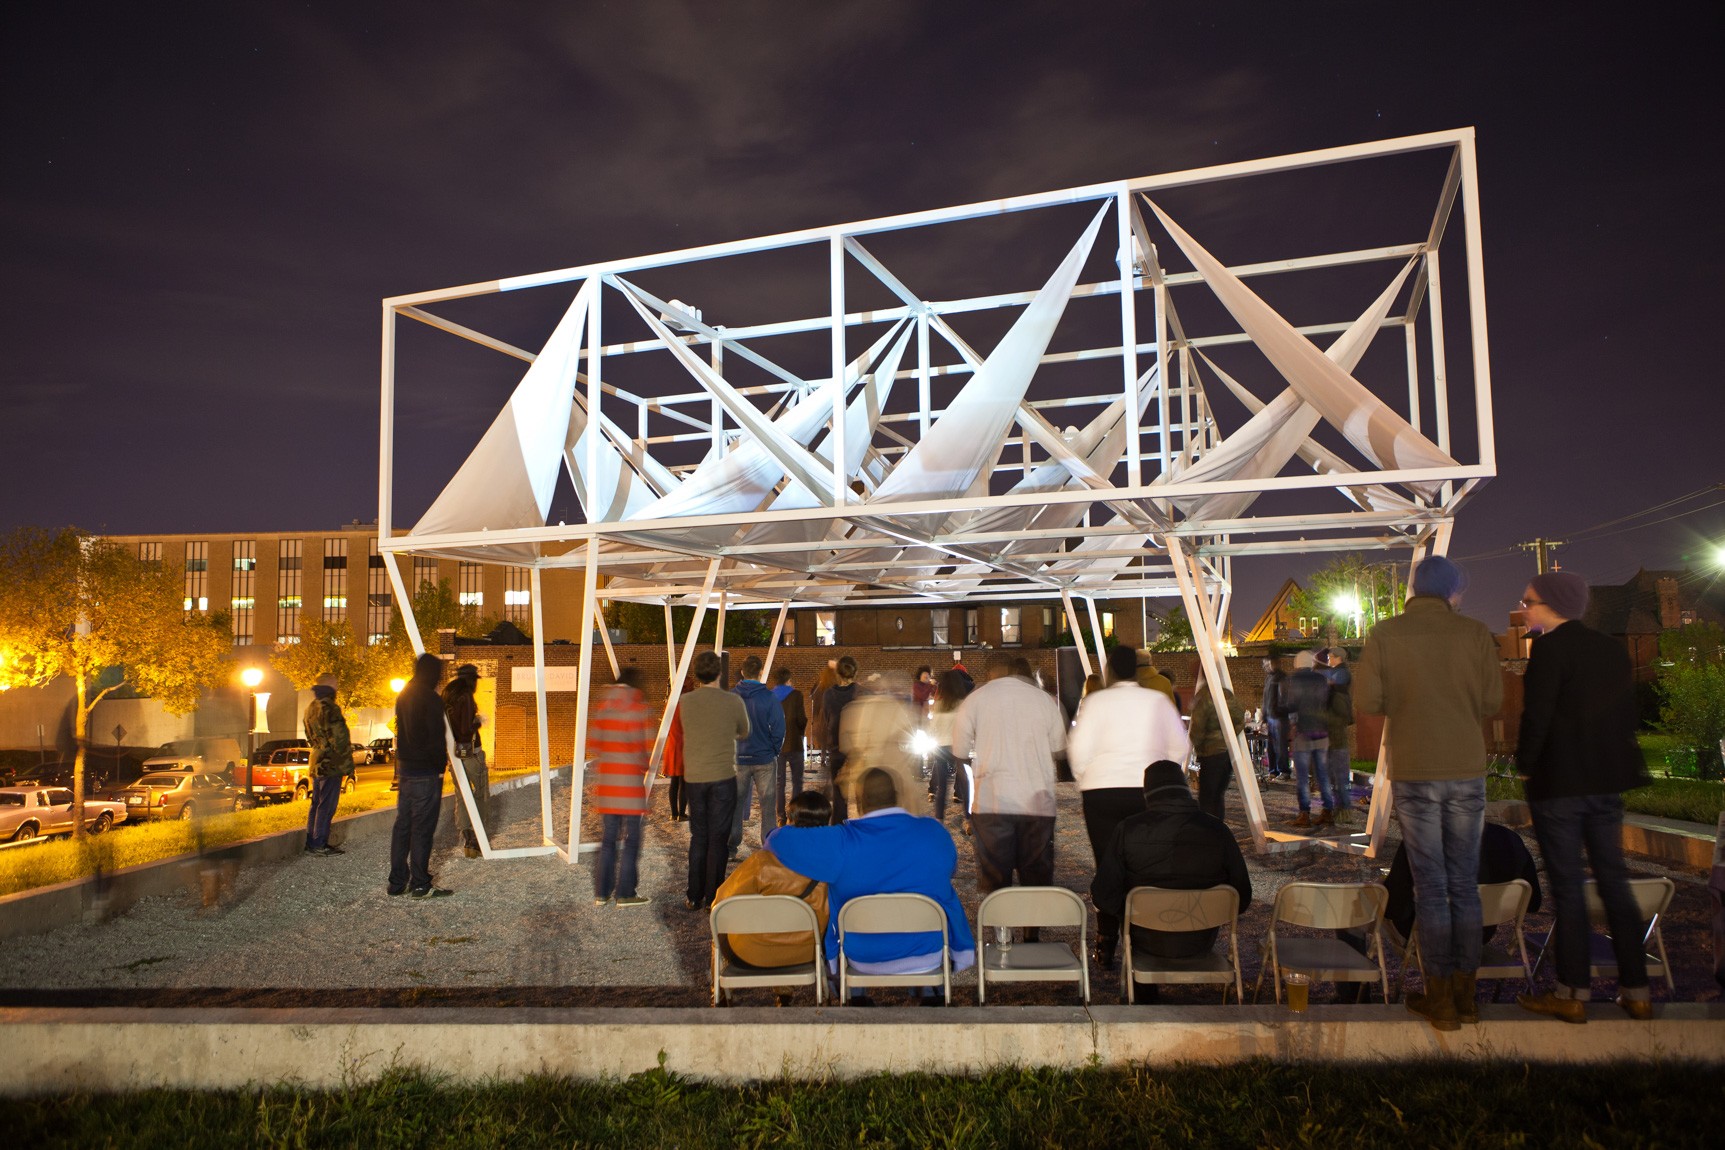 An audience gathers outdoors to watch performers under a large white installation canopy.